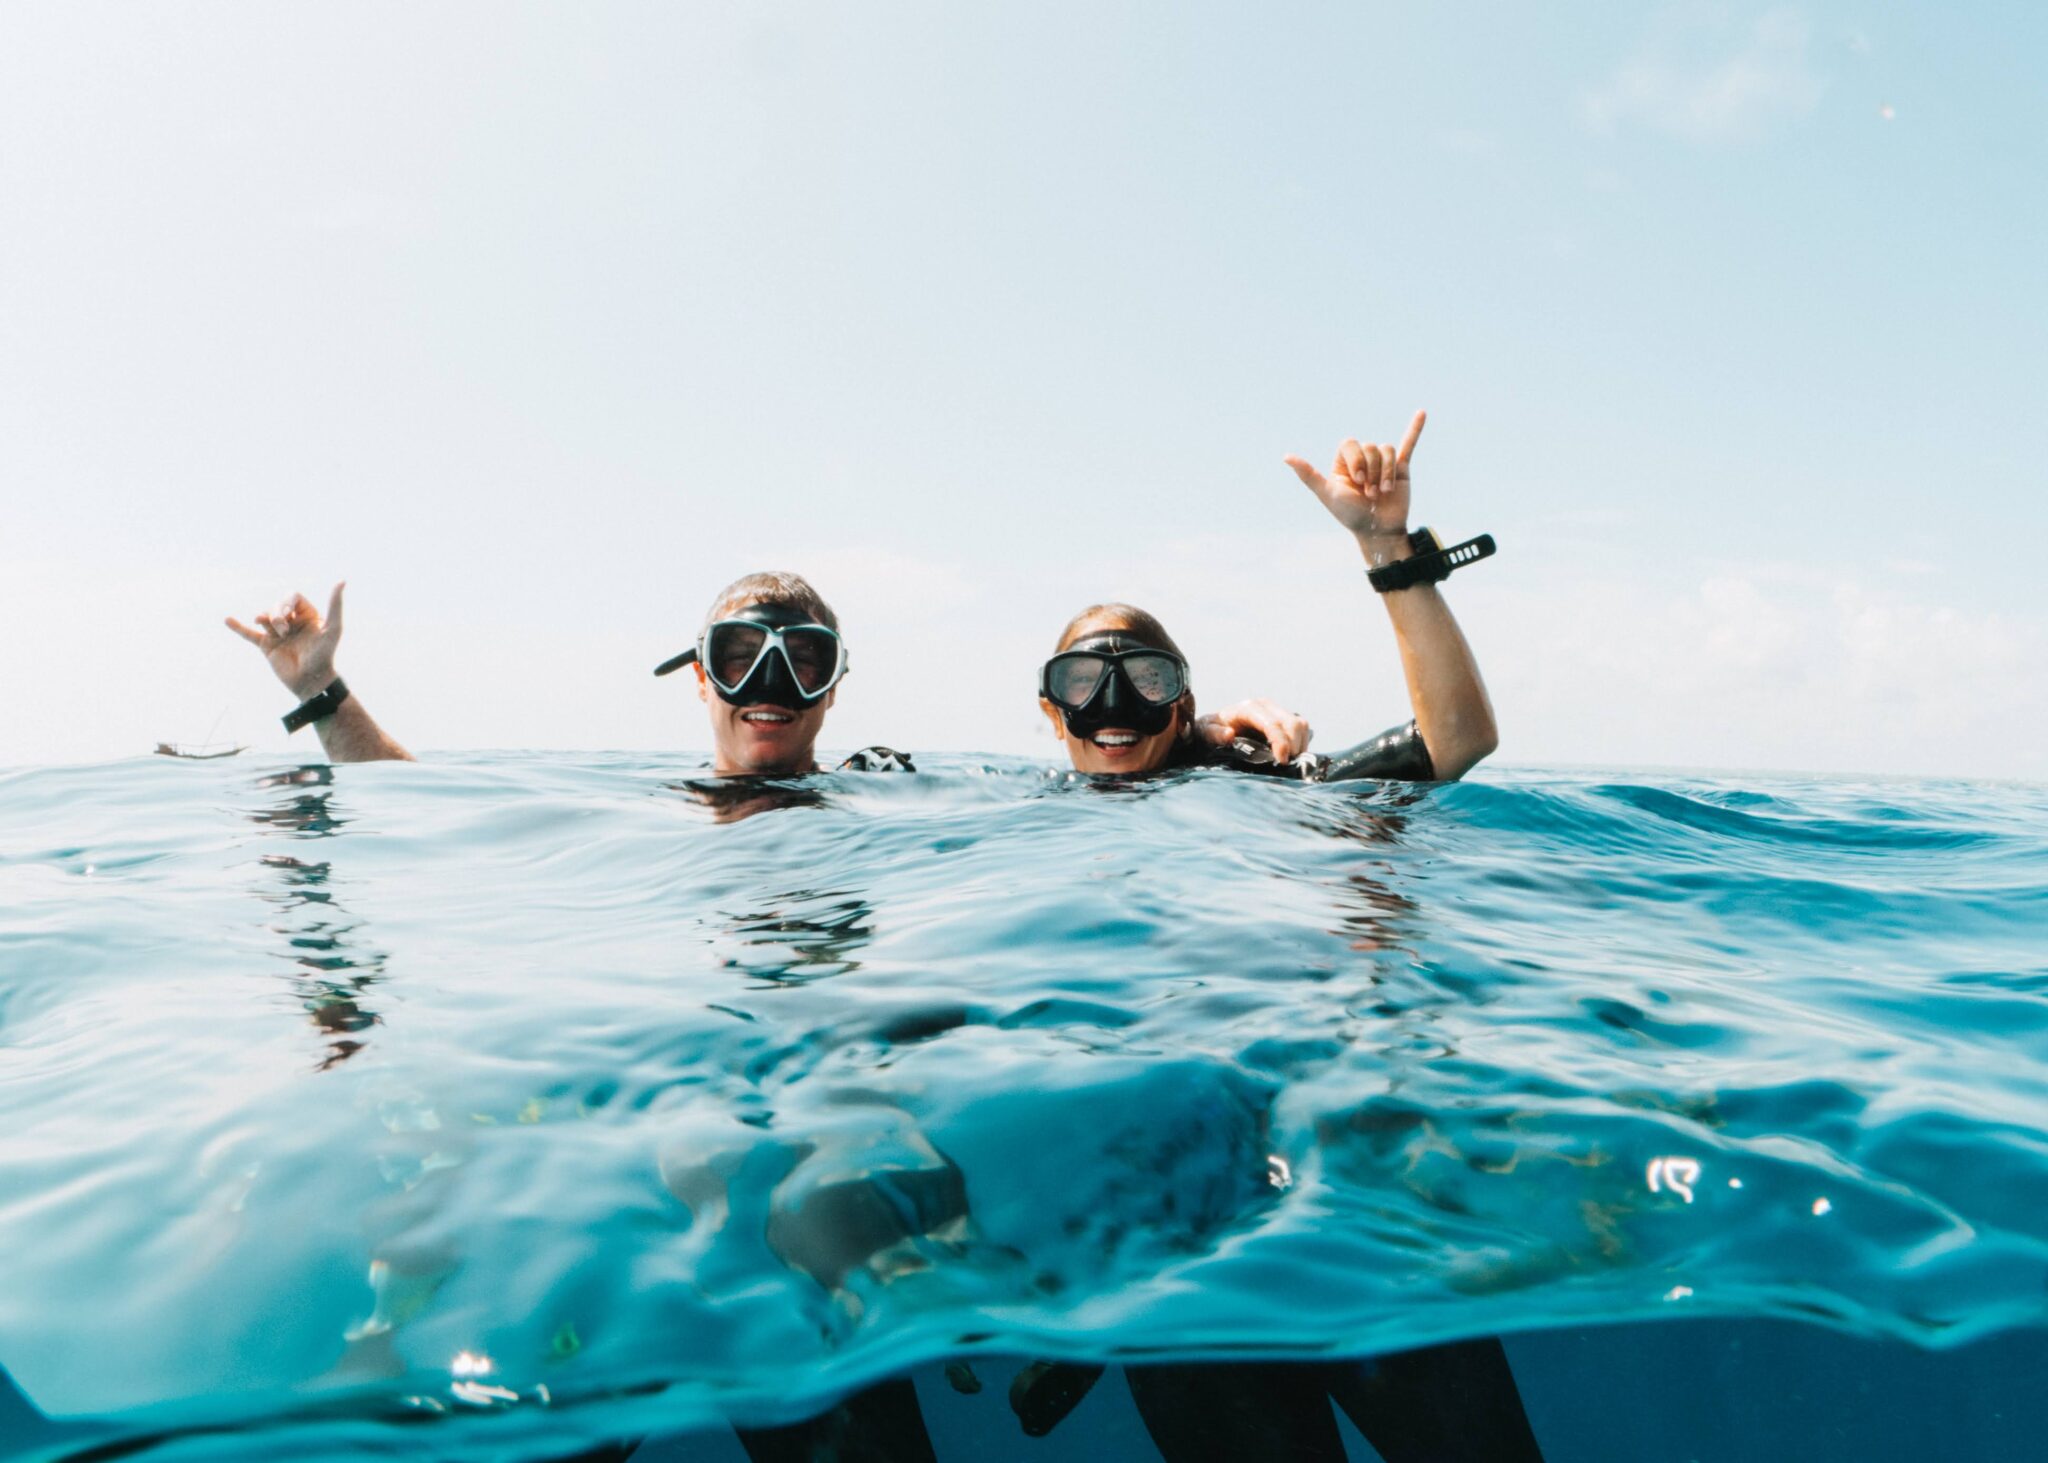 Mary Hannah and her husband give the hang loose signs from the water's surface after a scuba dive